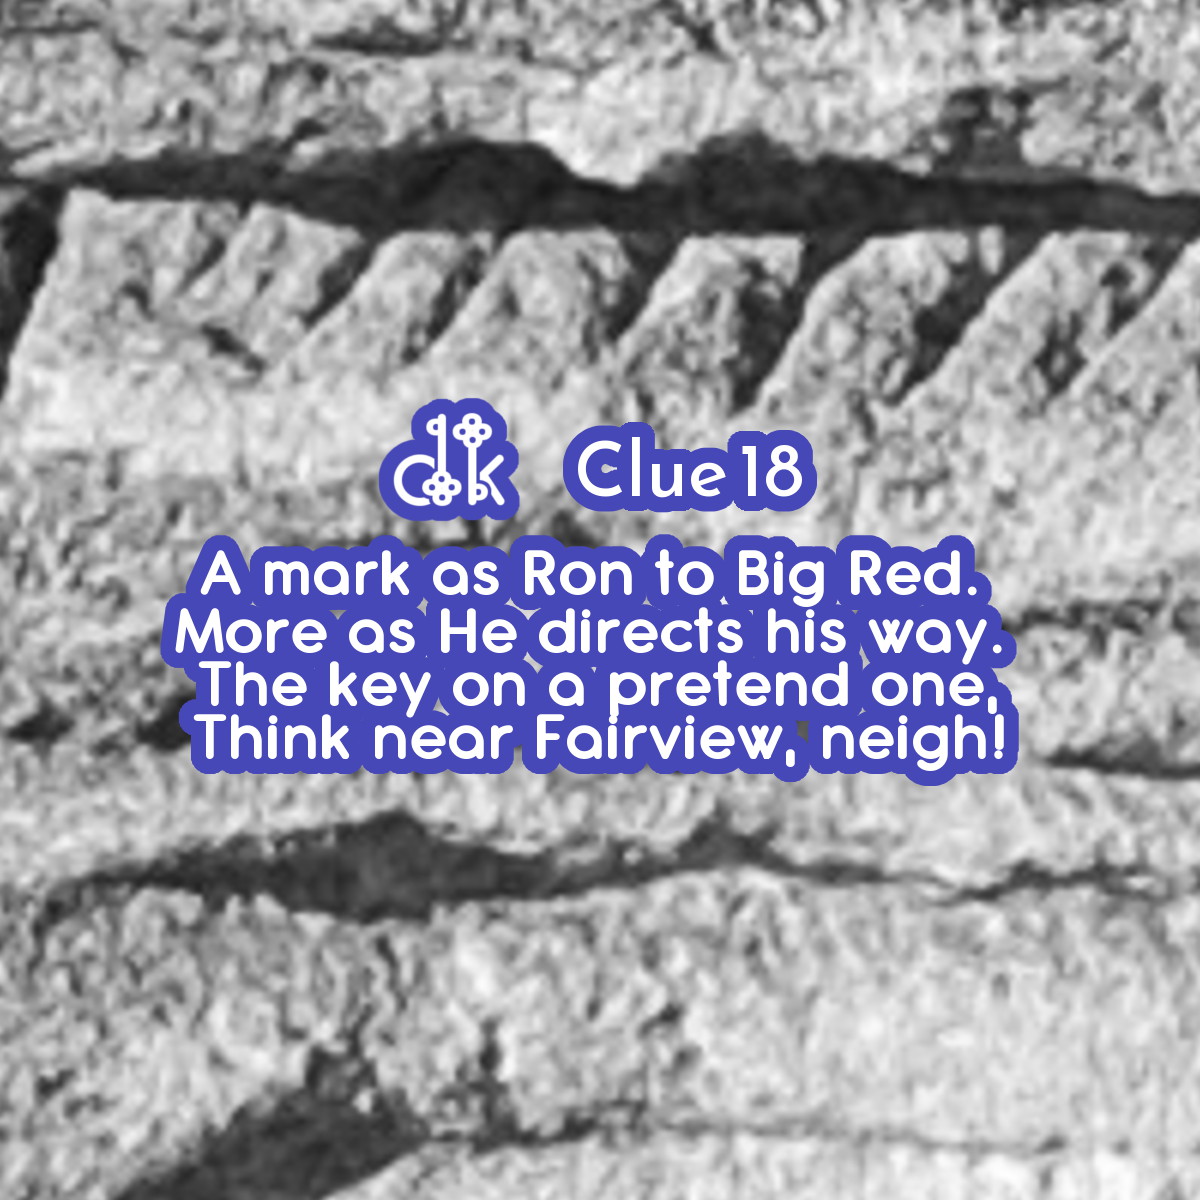 Clue #18 - A mark as Ron to Big Red.  More as He directs his way.  The key on a pretend one, Think near Fairview, neigh!